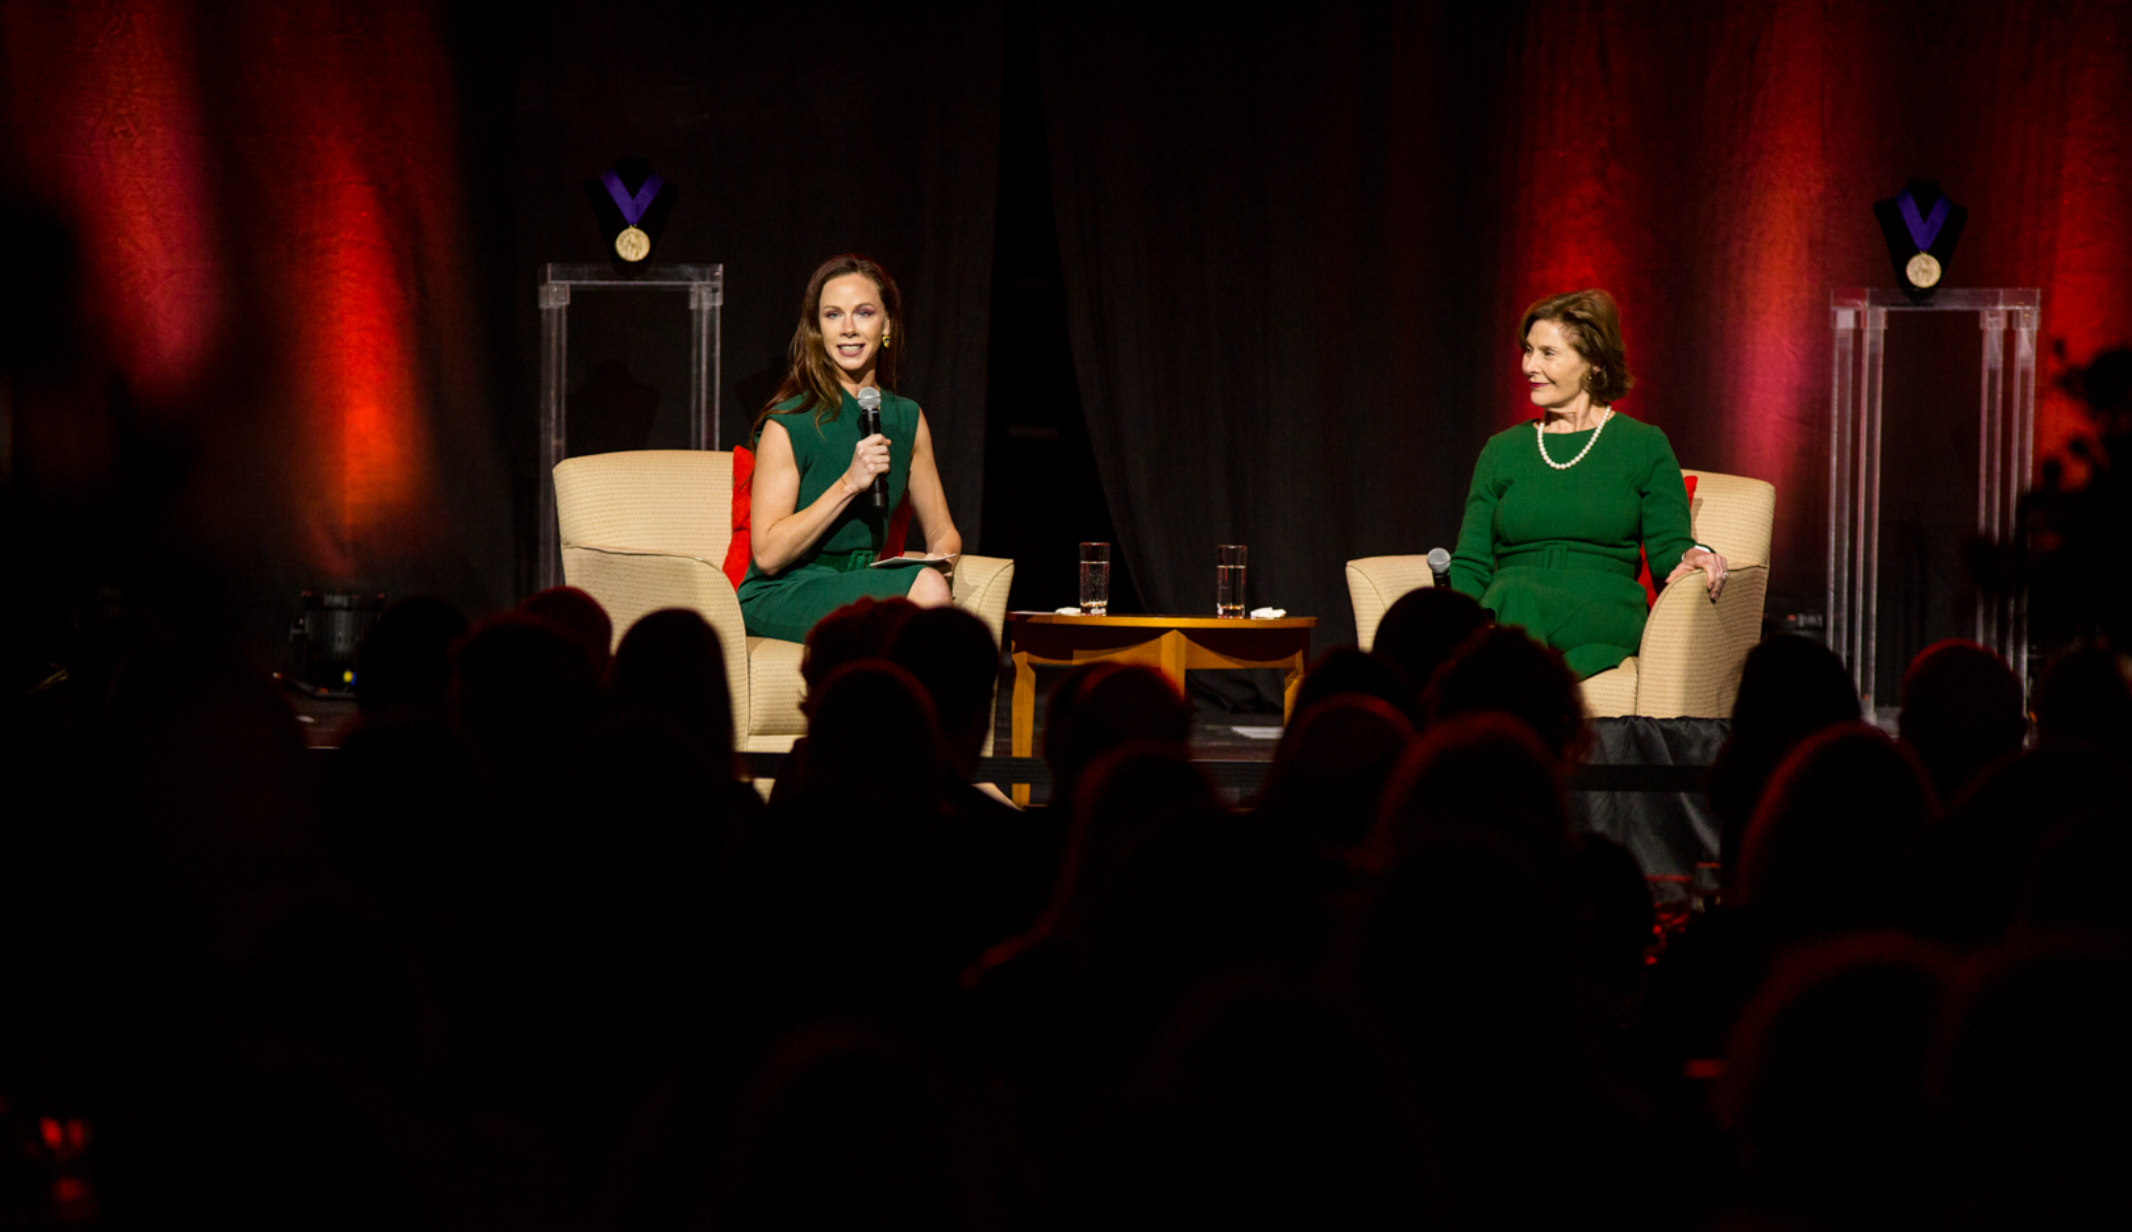 Former First Lady Laura Bush, right, and her daughter, Barbara Pierce Bush, discuss their White House years and beyond